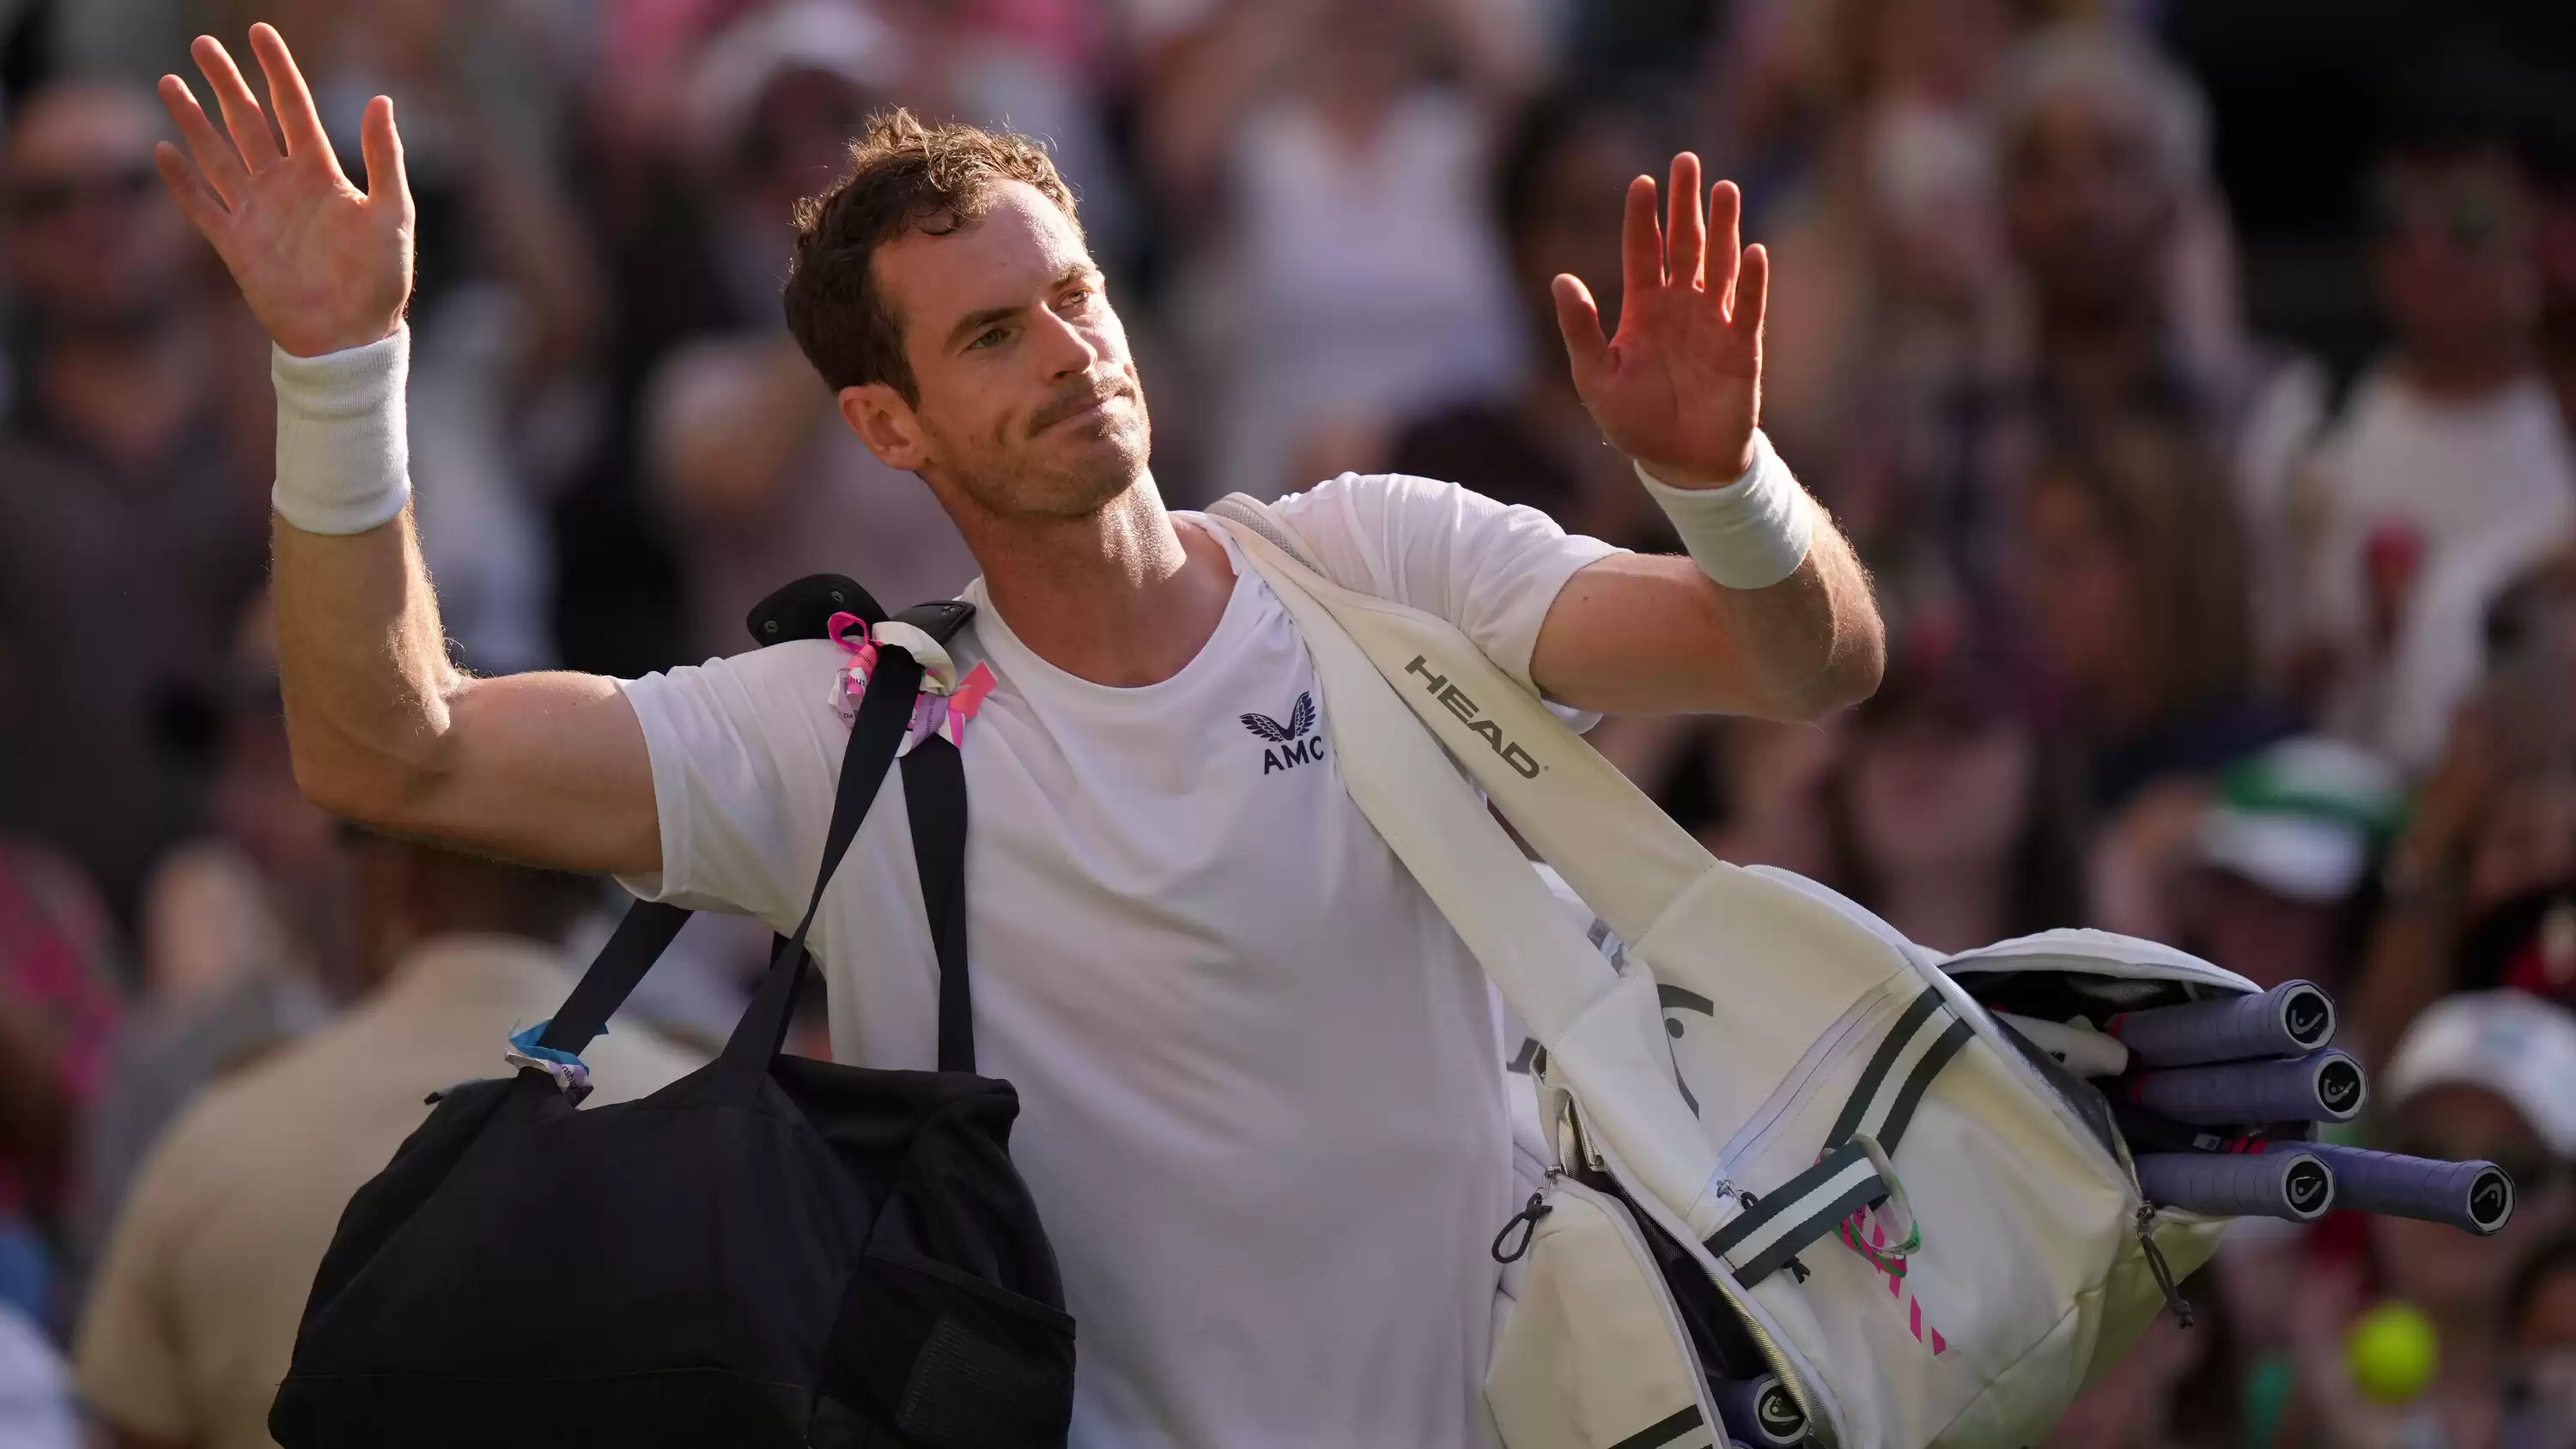 Andy Murray's Wimbledon Journey Ends in Disappointment